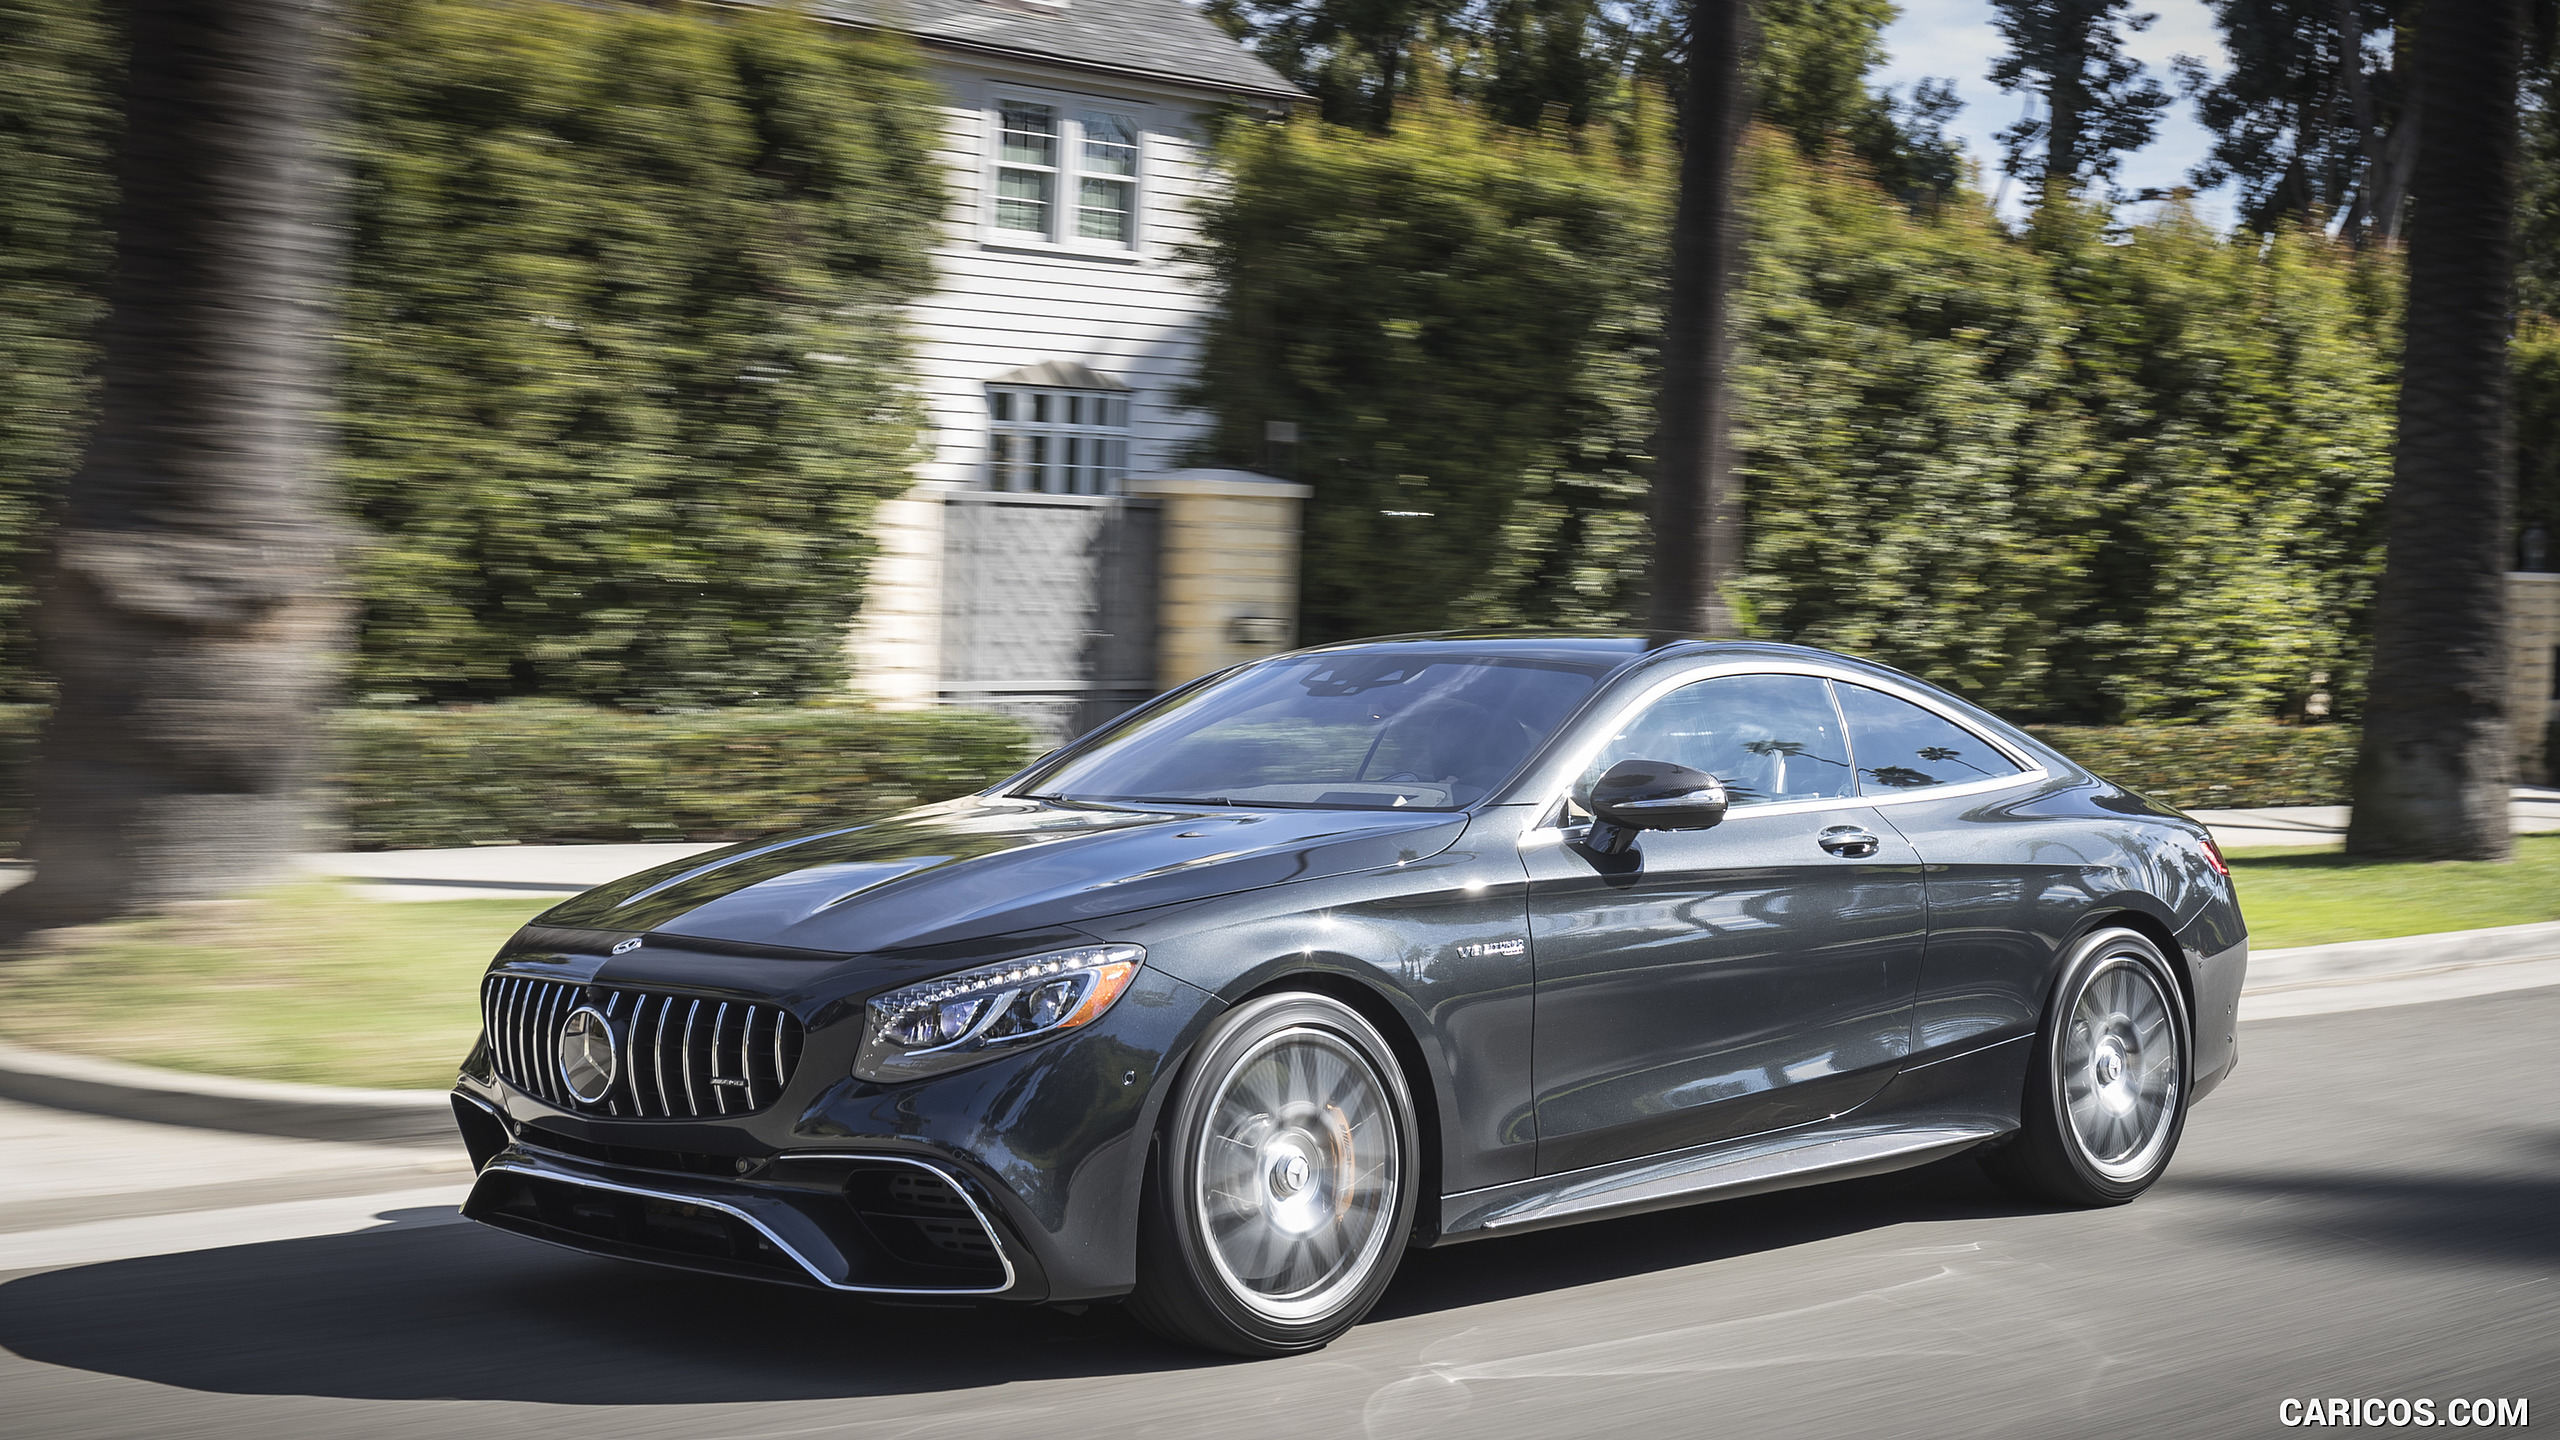 2018 Mercedes-AMG S63 Coupe (US-Spec) - Front Three-Quarter, #53 of 98